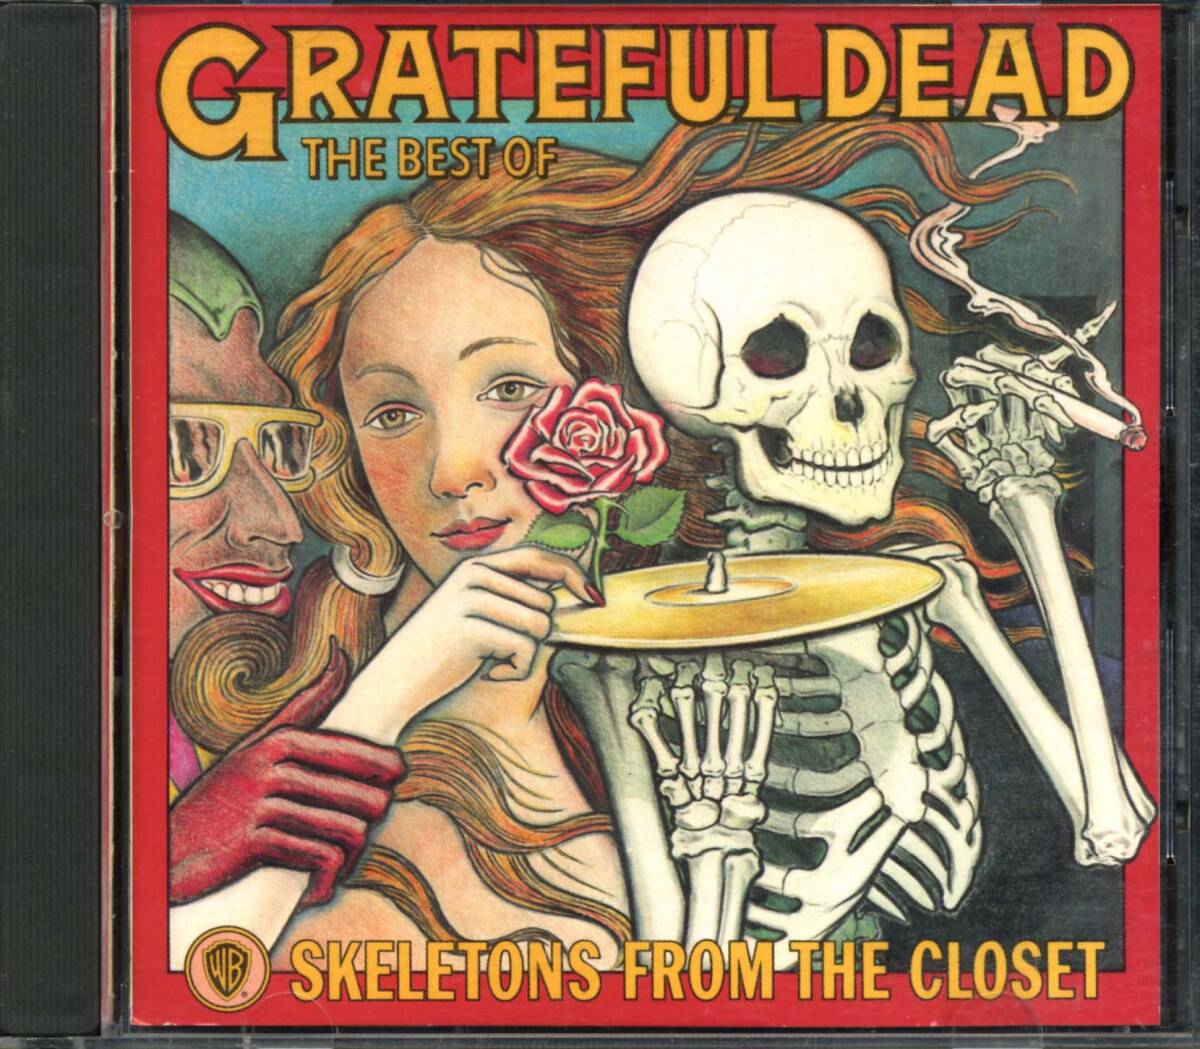 GRATEFUL DEAD★Skeletons From the Closet: The Best of Grateful Dead [グレイトフル デッド,ジェリー ガルシア,Jerry Garcia]の画像1